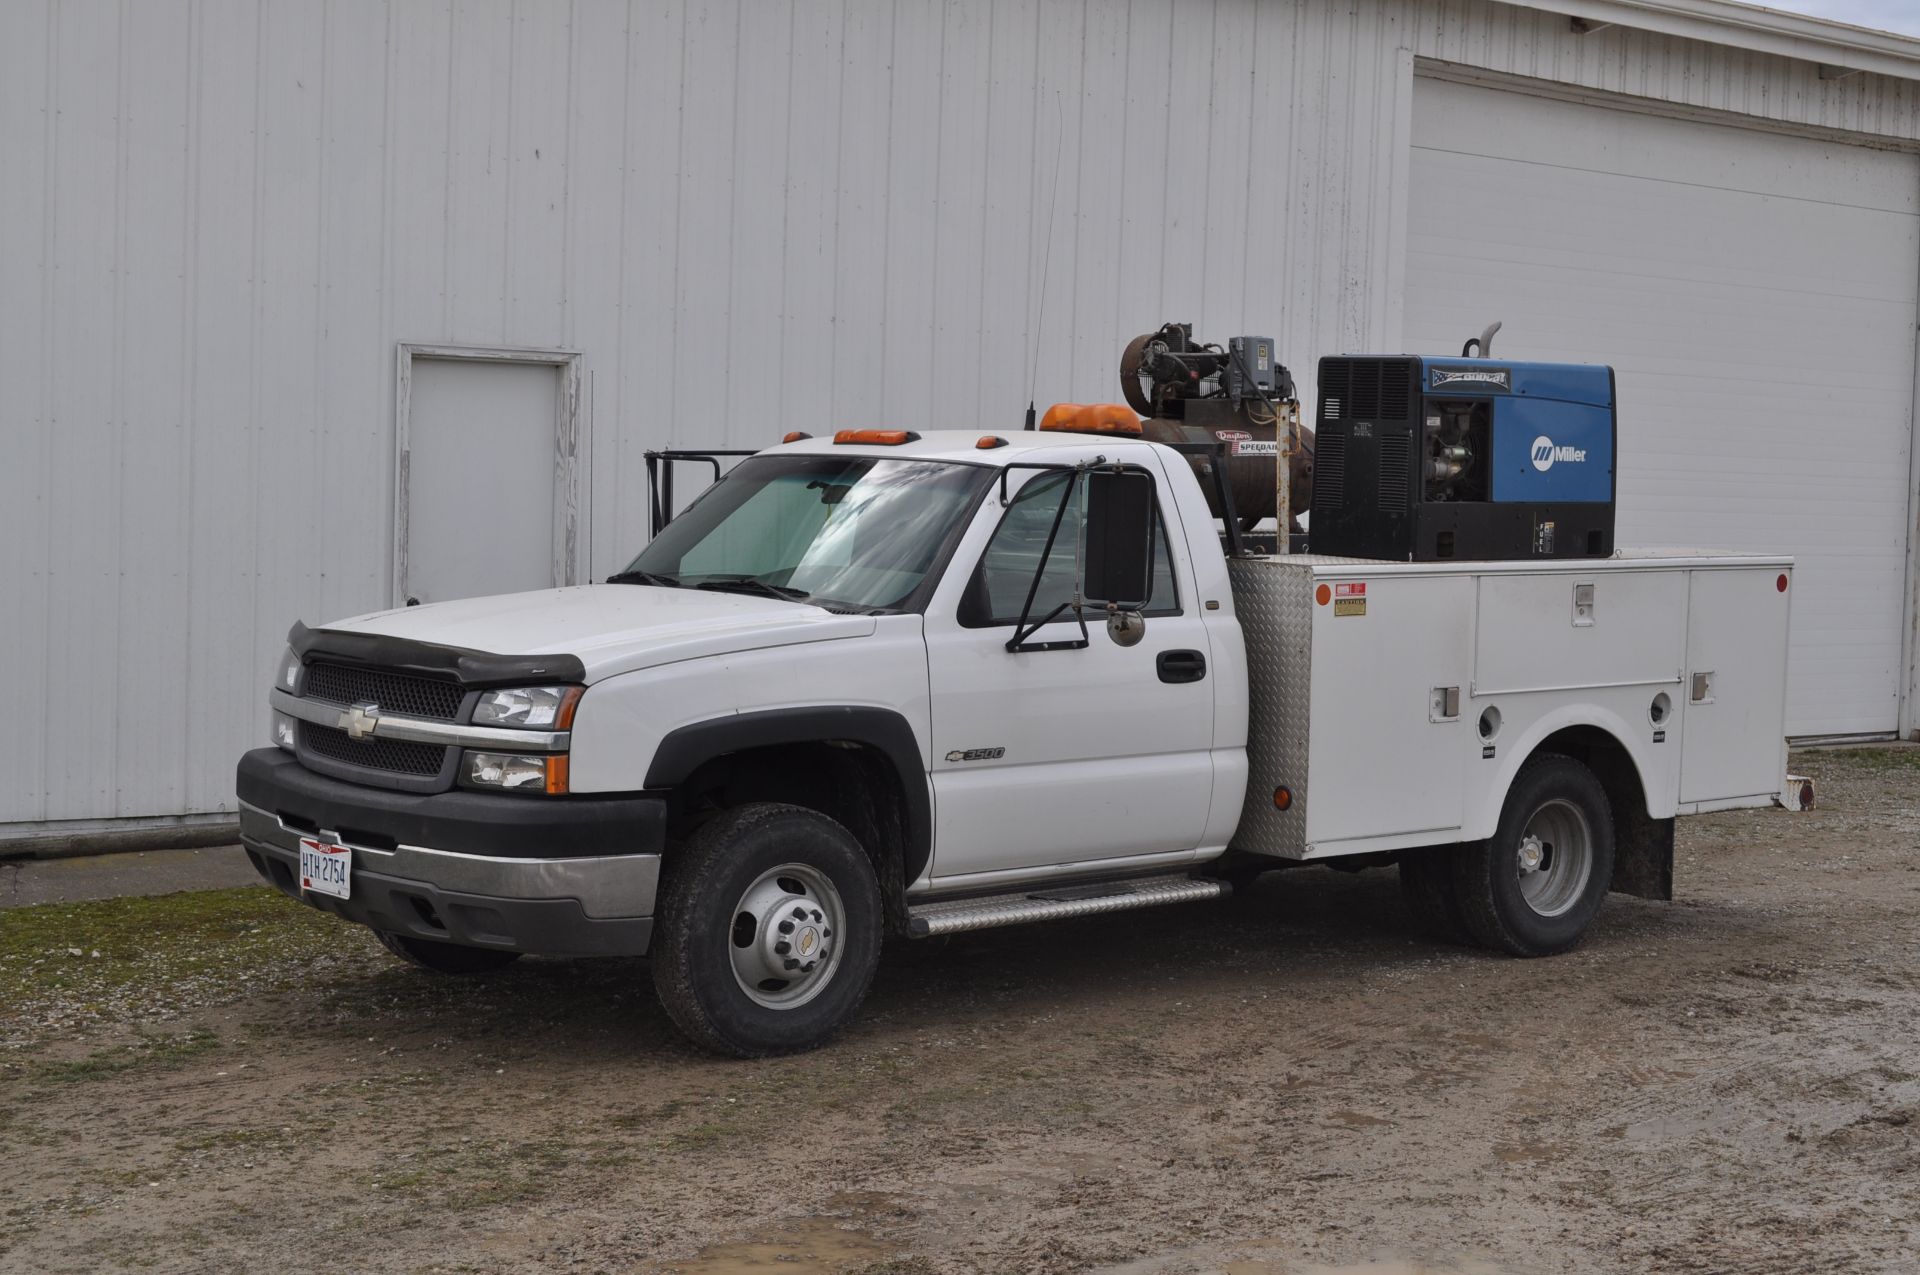 2003 Chevy 3500 service truck, standard cab, V-8 gas, automatic, 4x4, DRW, 42,206 miles, 9’ Stahl - Image 46 of 48